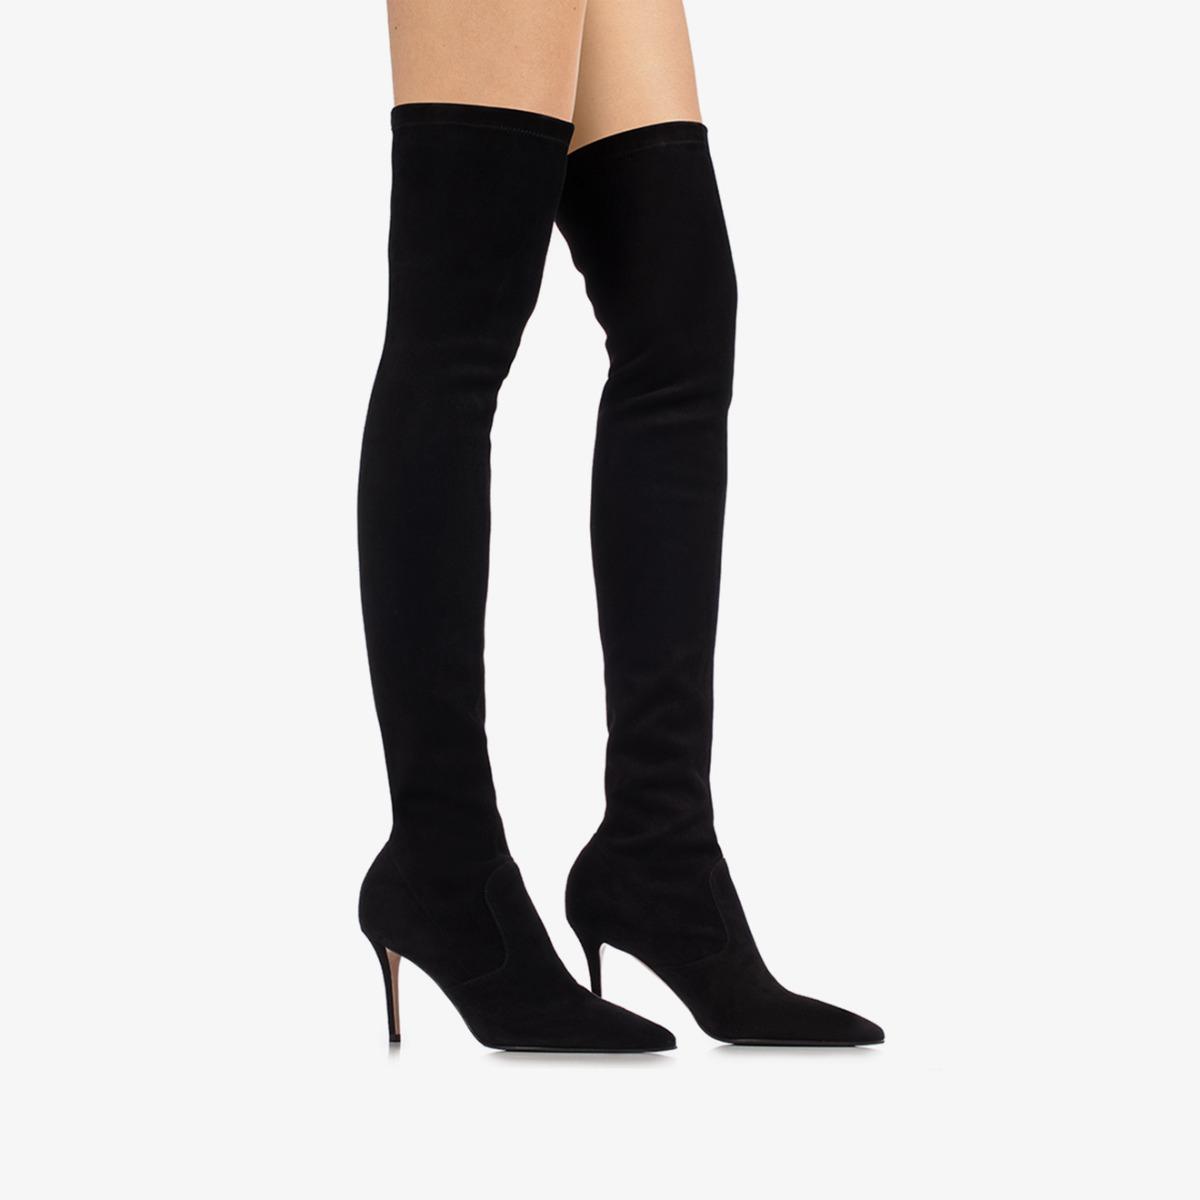 EVA THIGH-HIGH BOOT 90 mm - Le Silla official outlet